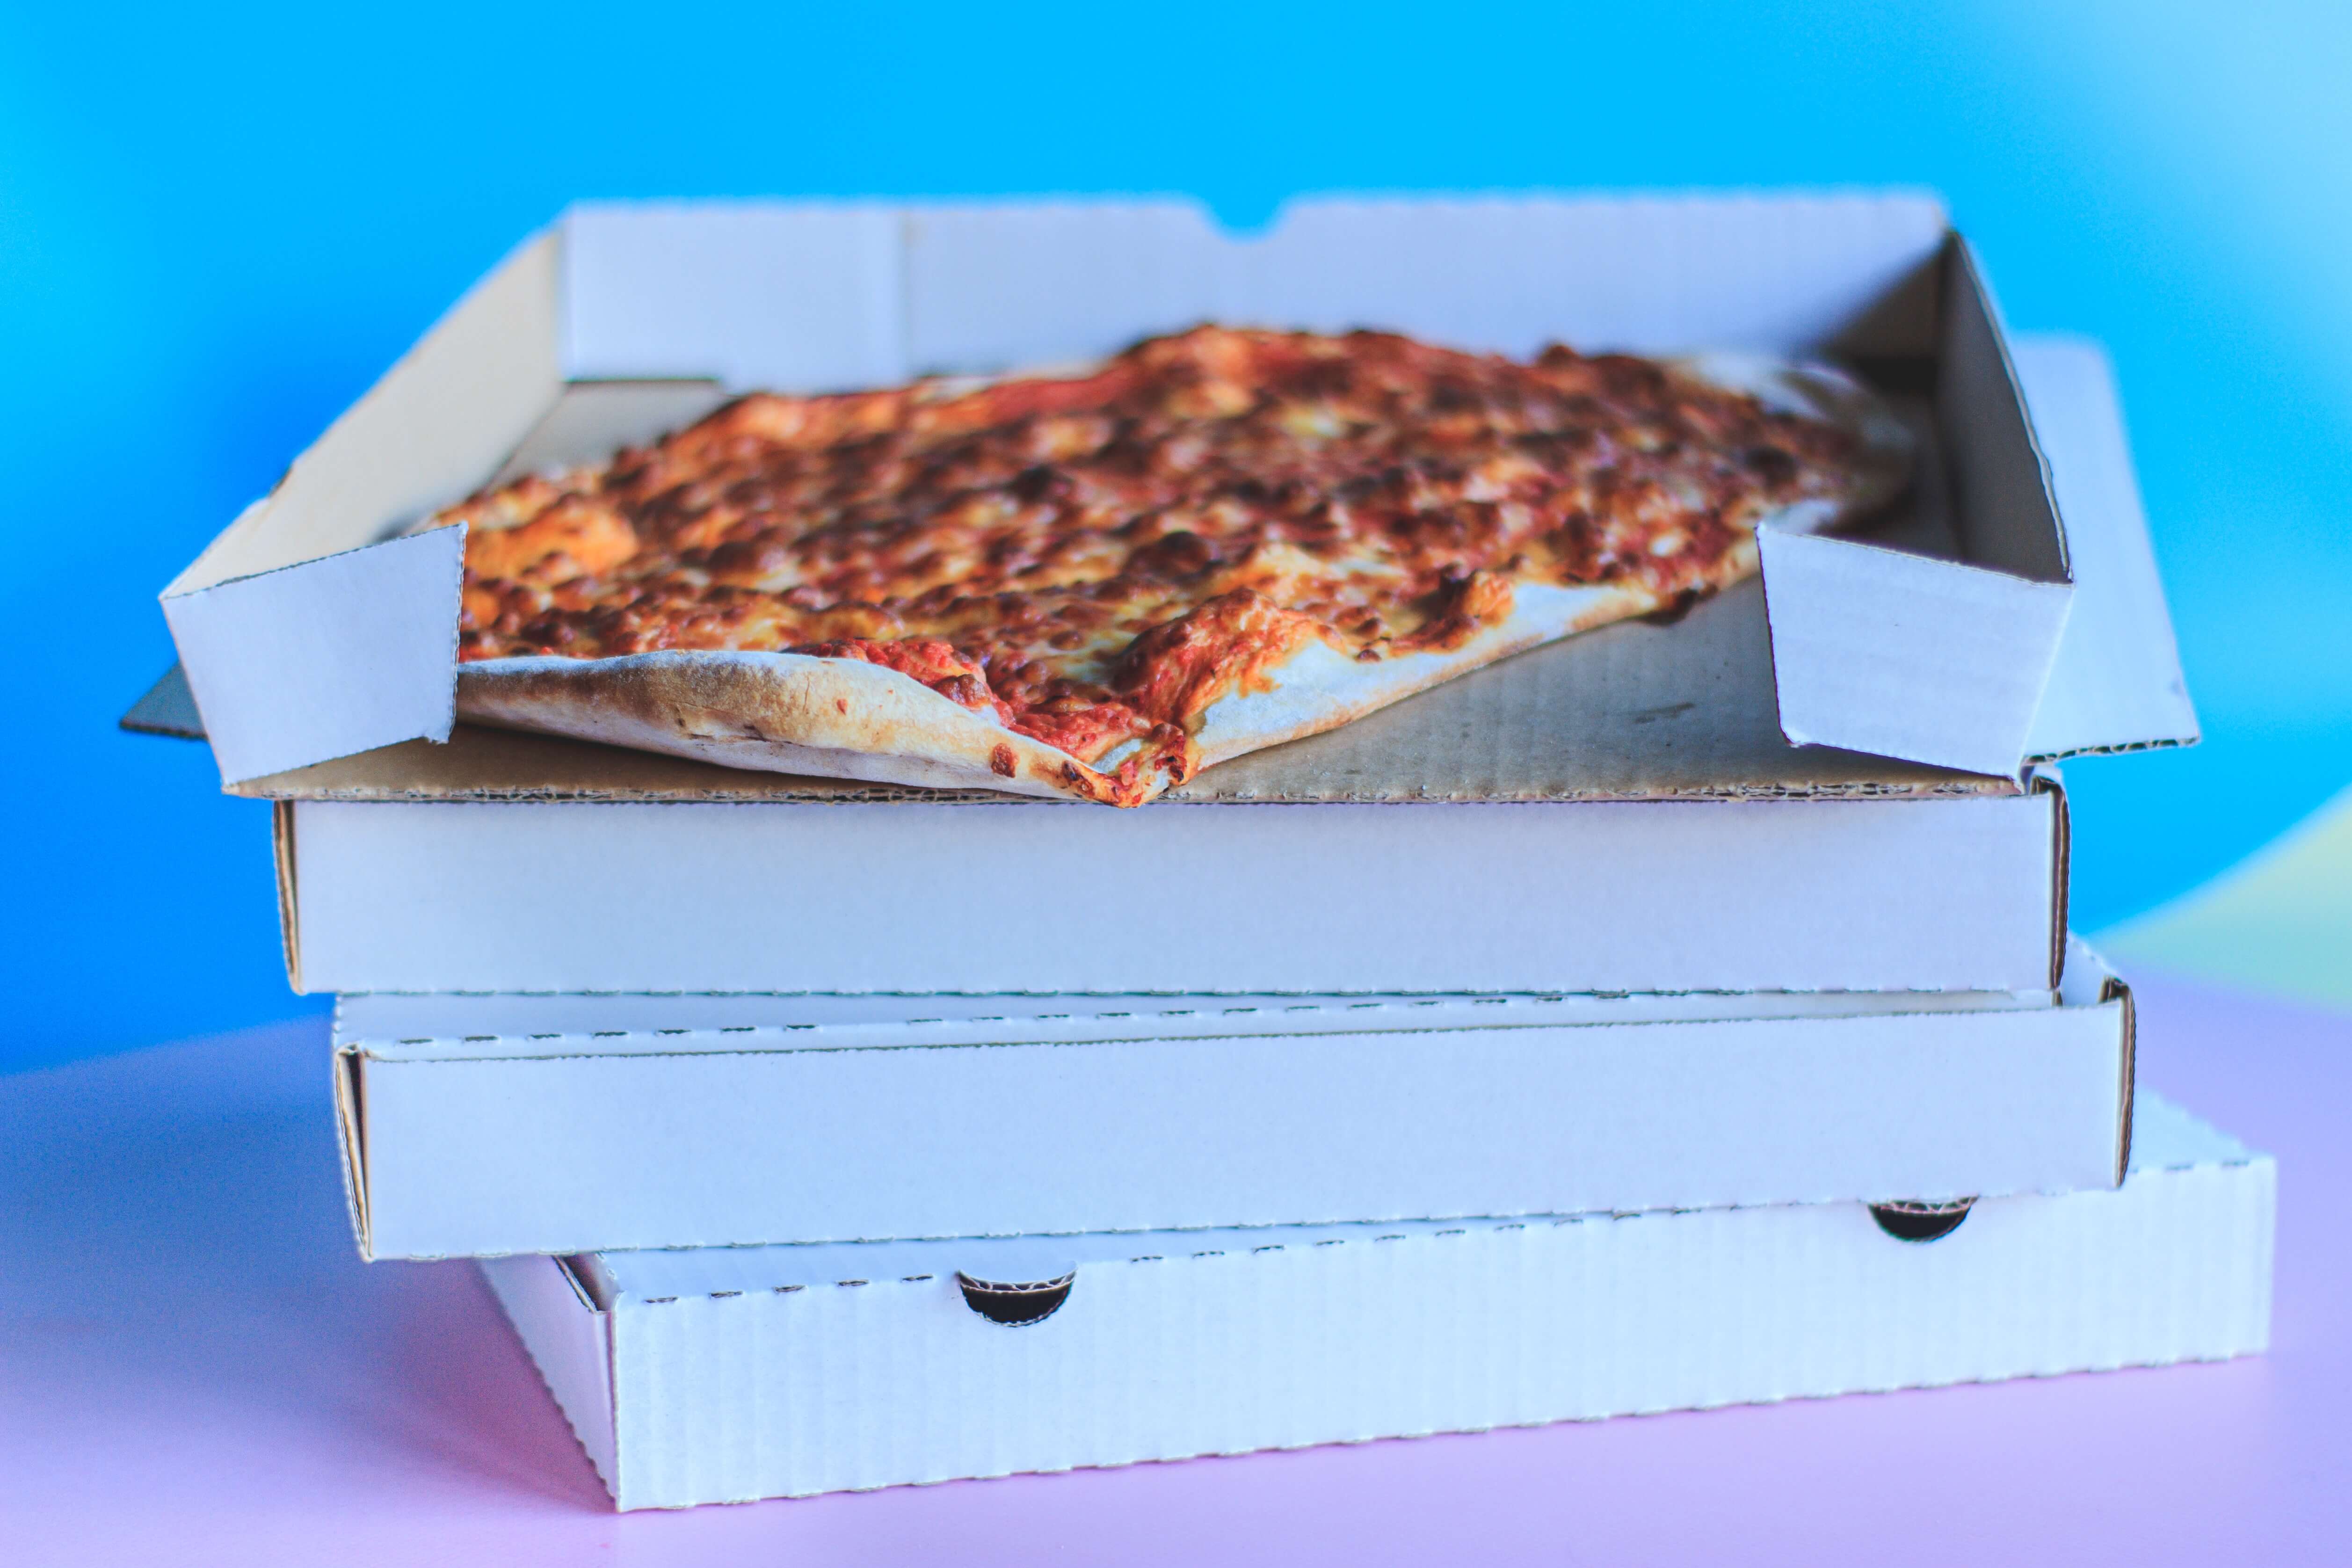 Four pizza boxes stacked on top of each other with an open box on top.